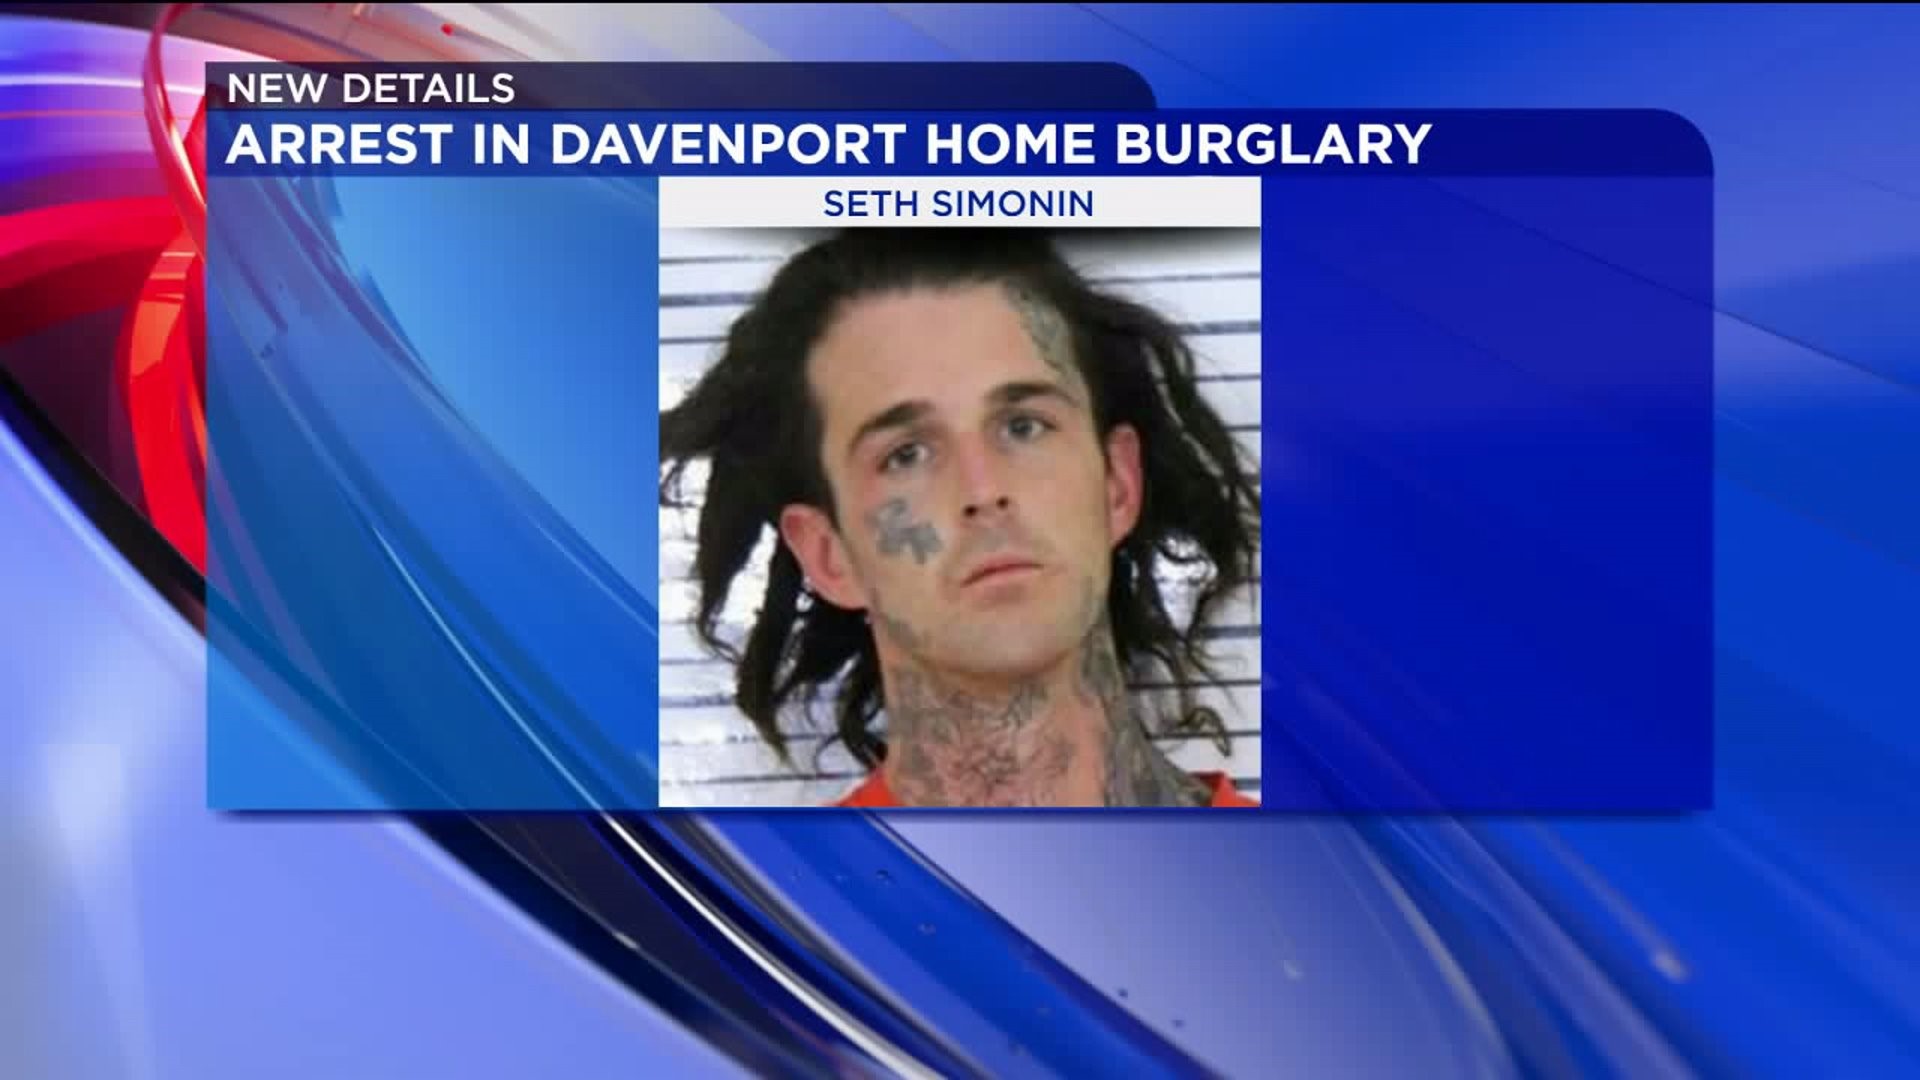 Man suspected of being thief caught on video stealing christmas presents from Davenport home arrested